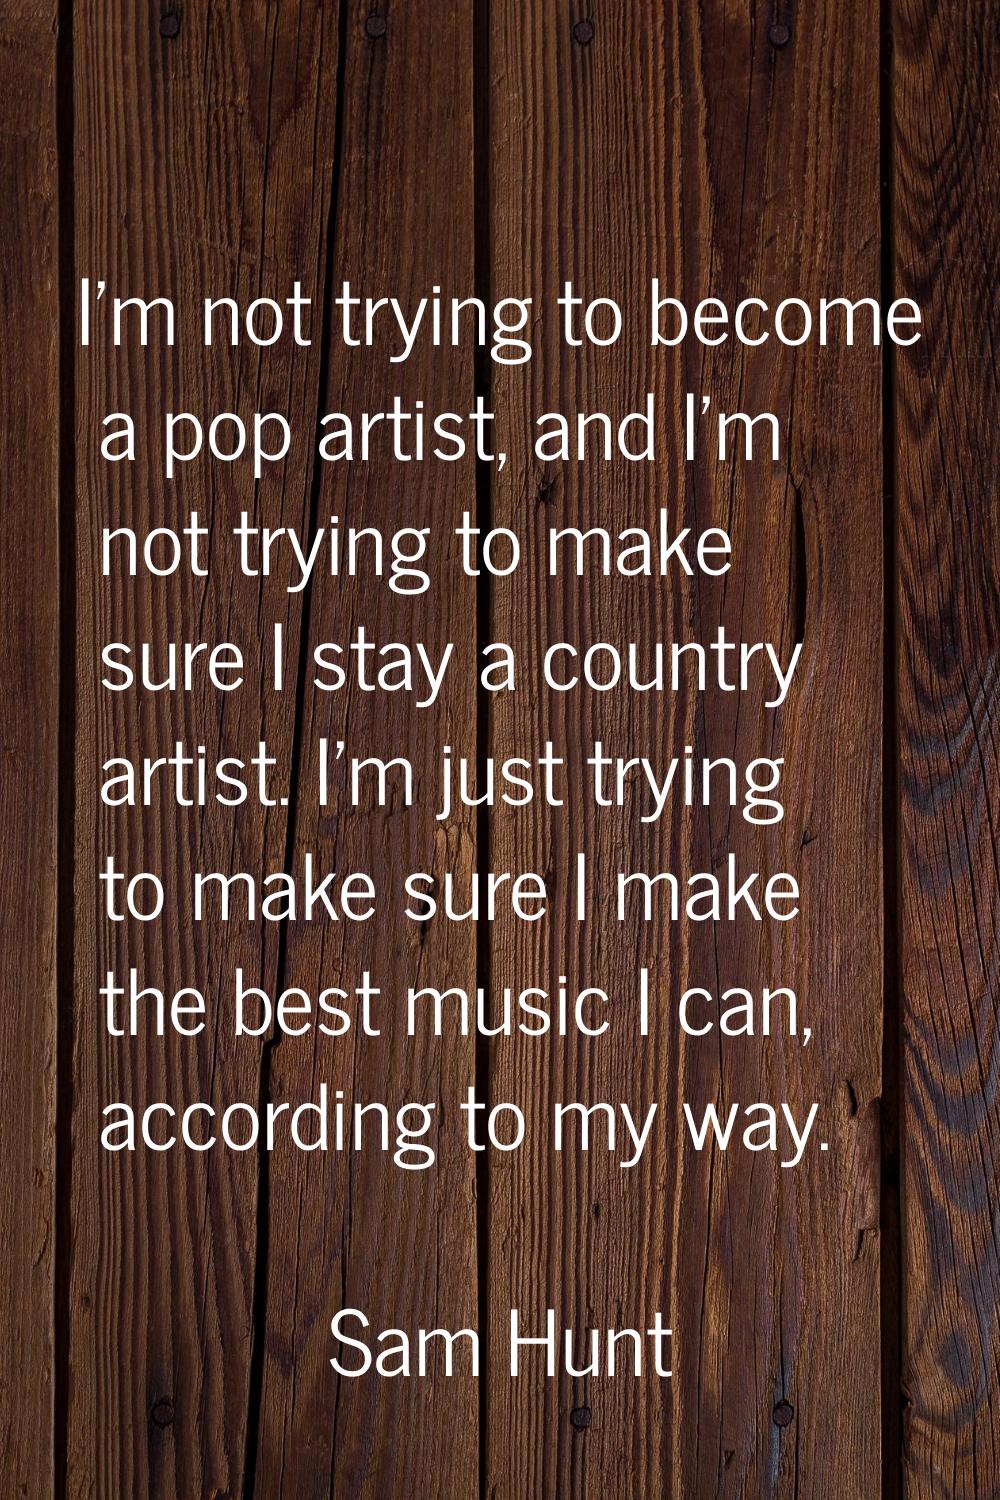 I'm not trying to become a pop artist, and I'm not trying to make sure I stay a country artist. I'm